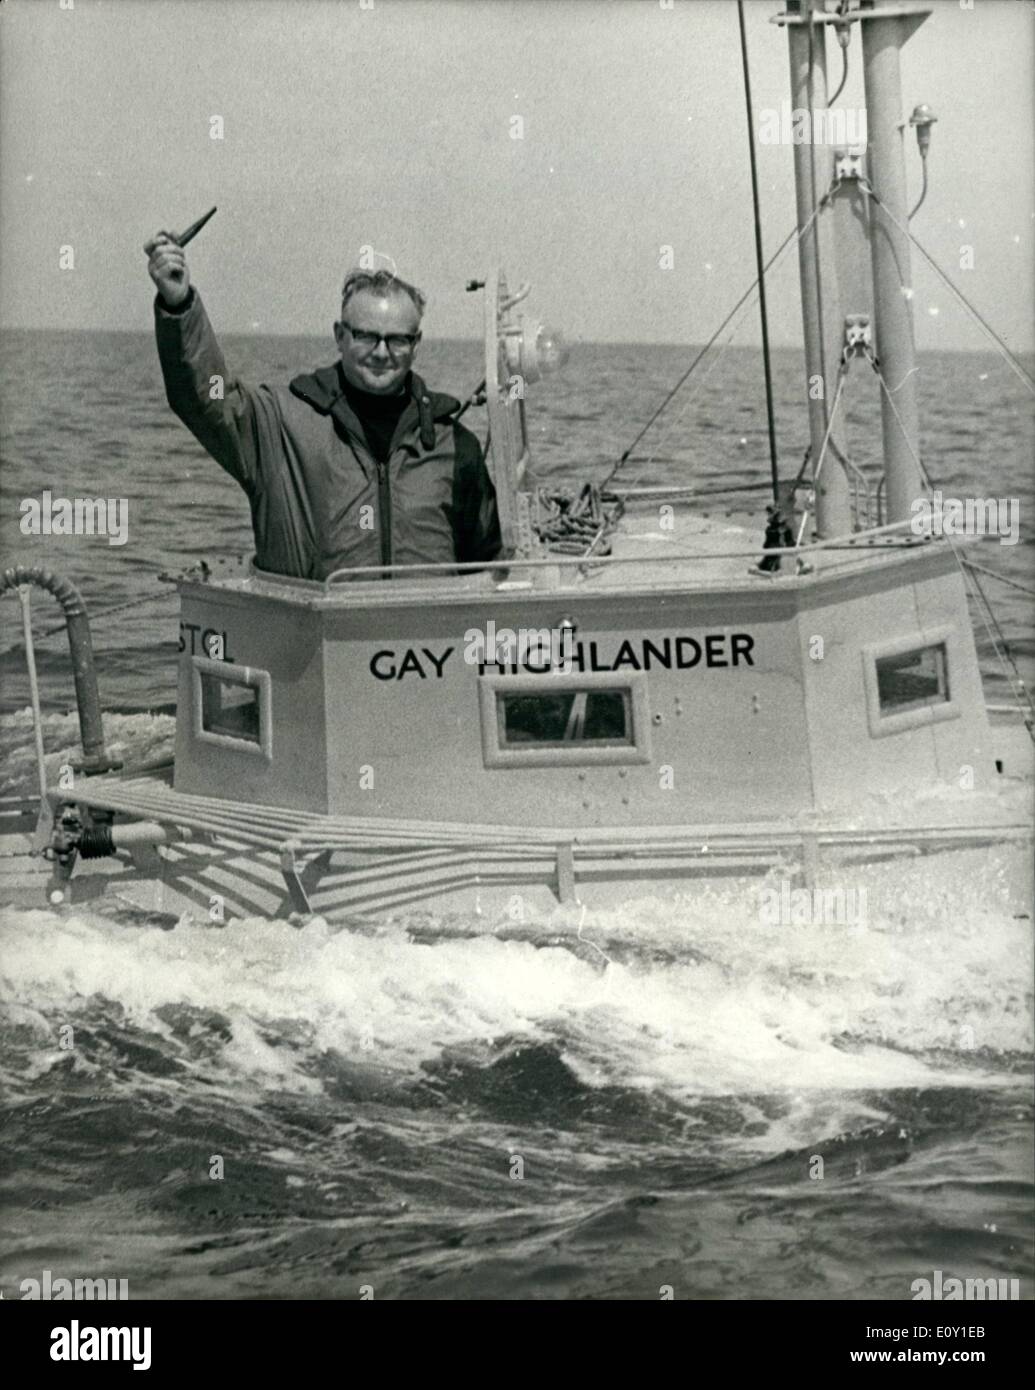 May 05, 1968 - He hopes to make single handed crossing of Atlantic in Submarine Shaped steel cylinder. 52 year old Douglas Price , of Temple Cloud, Somerset, with is home made submarine shaped cylinder , Gay Highlander, 26ft. long, during trials at Torbay, Devon. The boat , which has passed the Beard of Trade inspection , is powered by a converted lorry engine , and is registered at 1,32 tons. Mr. Price hopes to make an Atlantic single handed crossing by the southern route in June in 40 days. Stock Photo